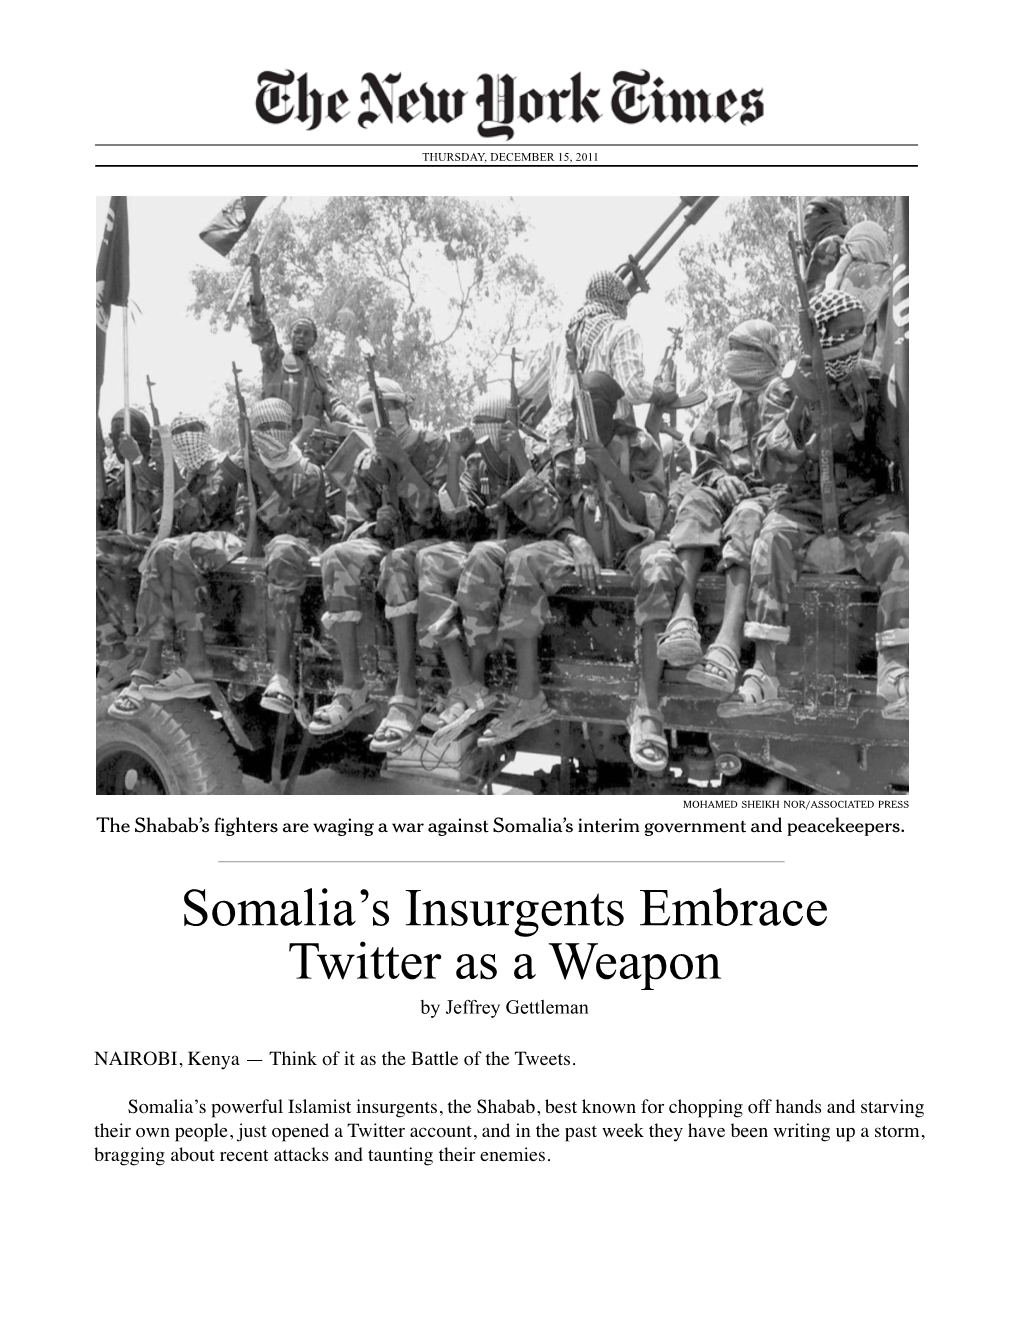 Somalia's Insurgents Embrace Twitter As a Weapon